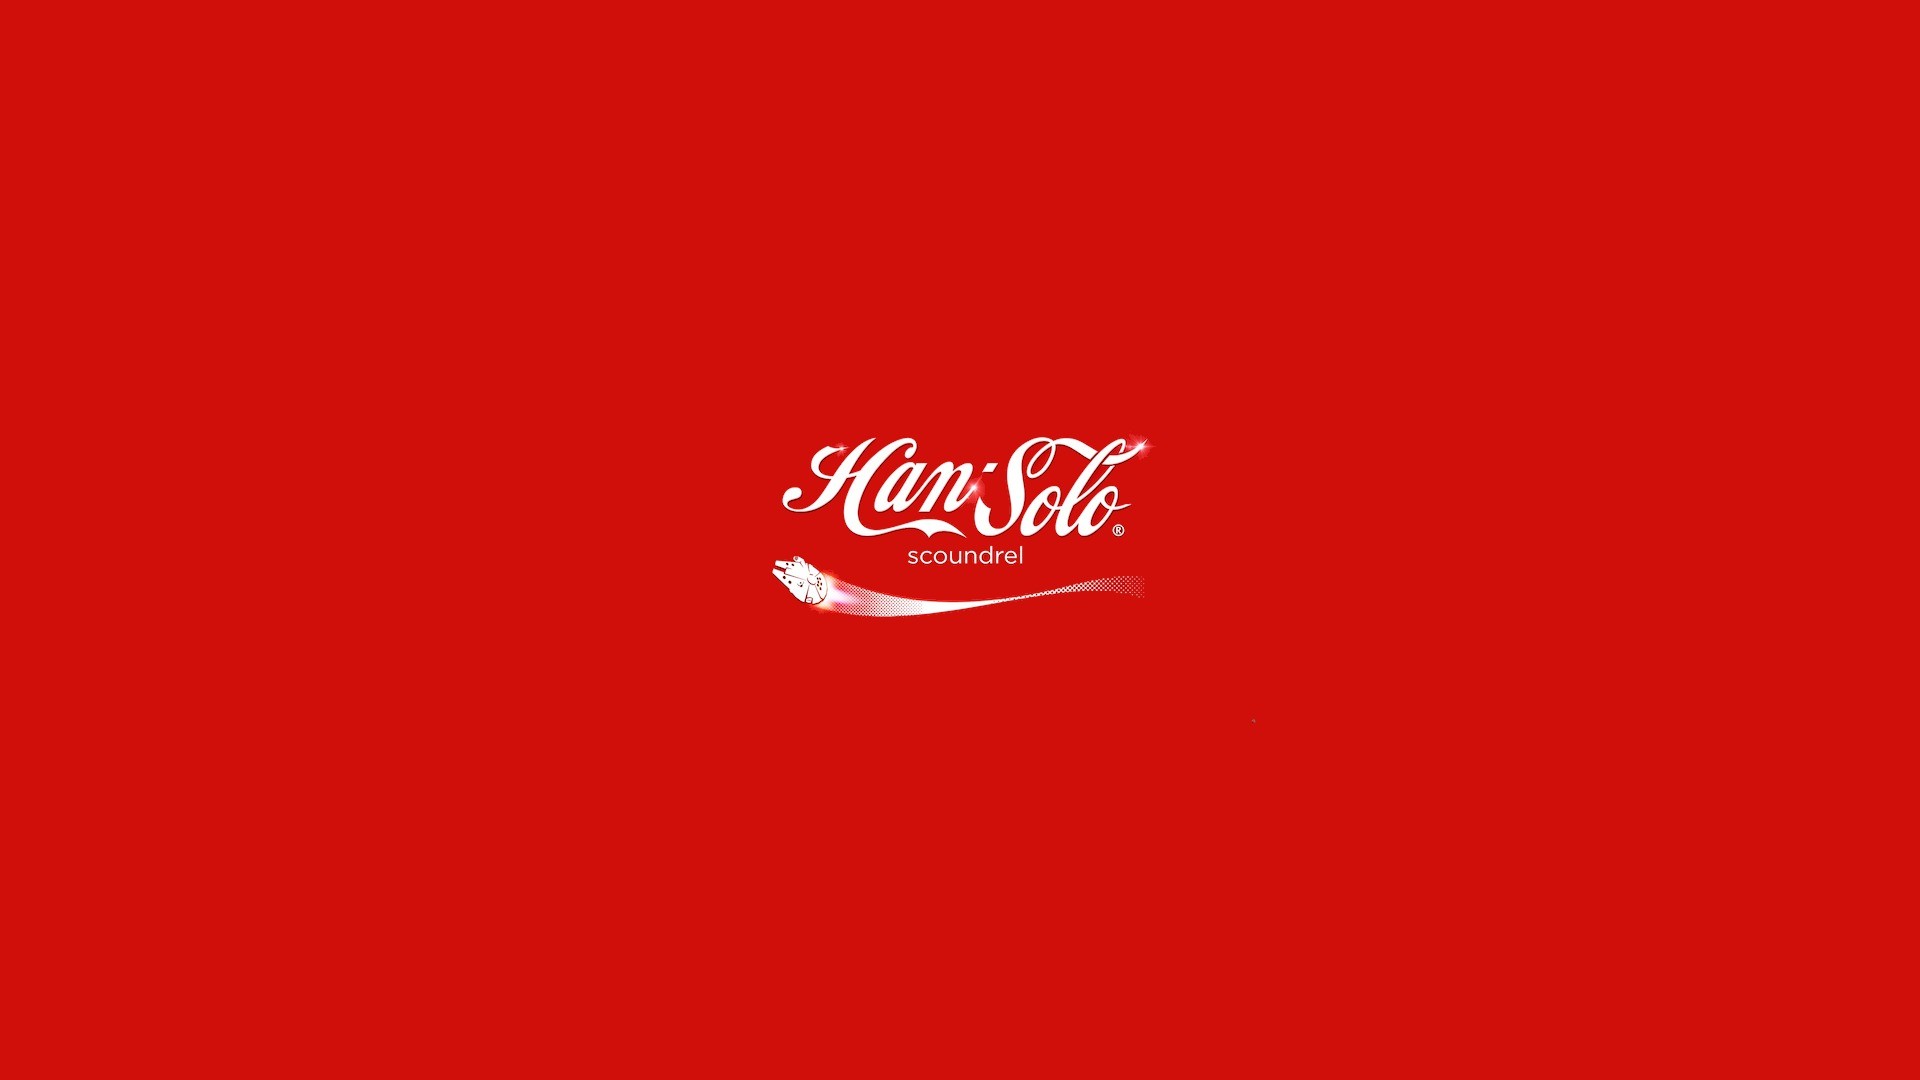 General 1920x1080 Coca-Cola Han Solo simple background Millennium Falcon red background minimalism Star Wars humor Star Wars Humor typography science fiction movies spaceship Star Wars Ships vehicle logo